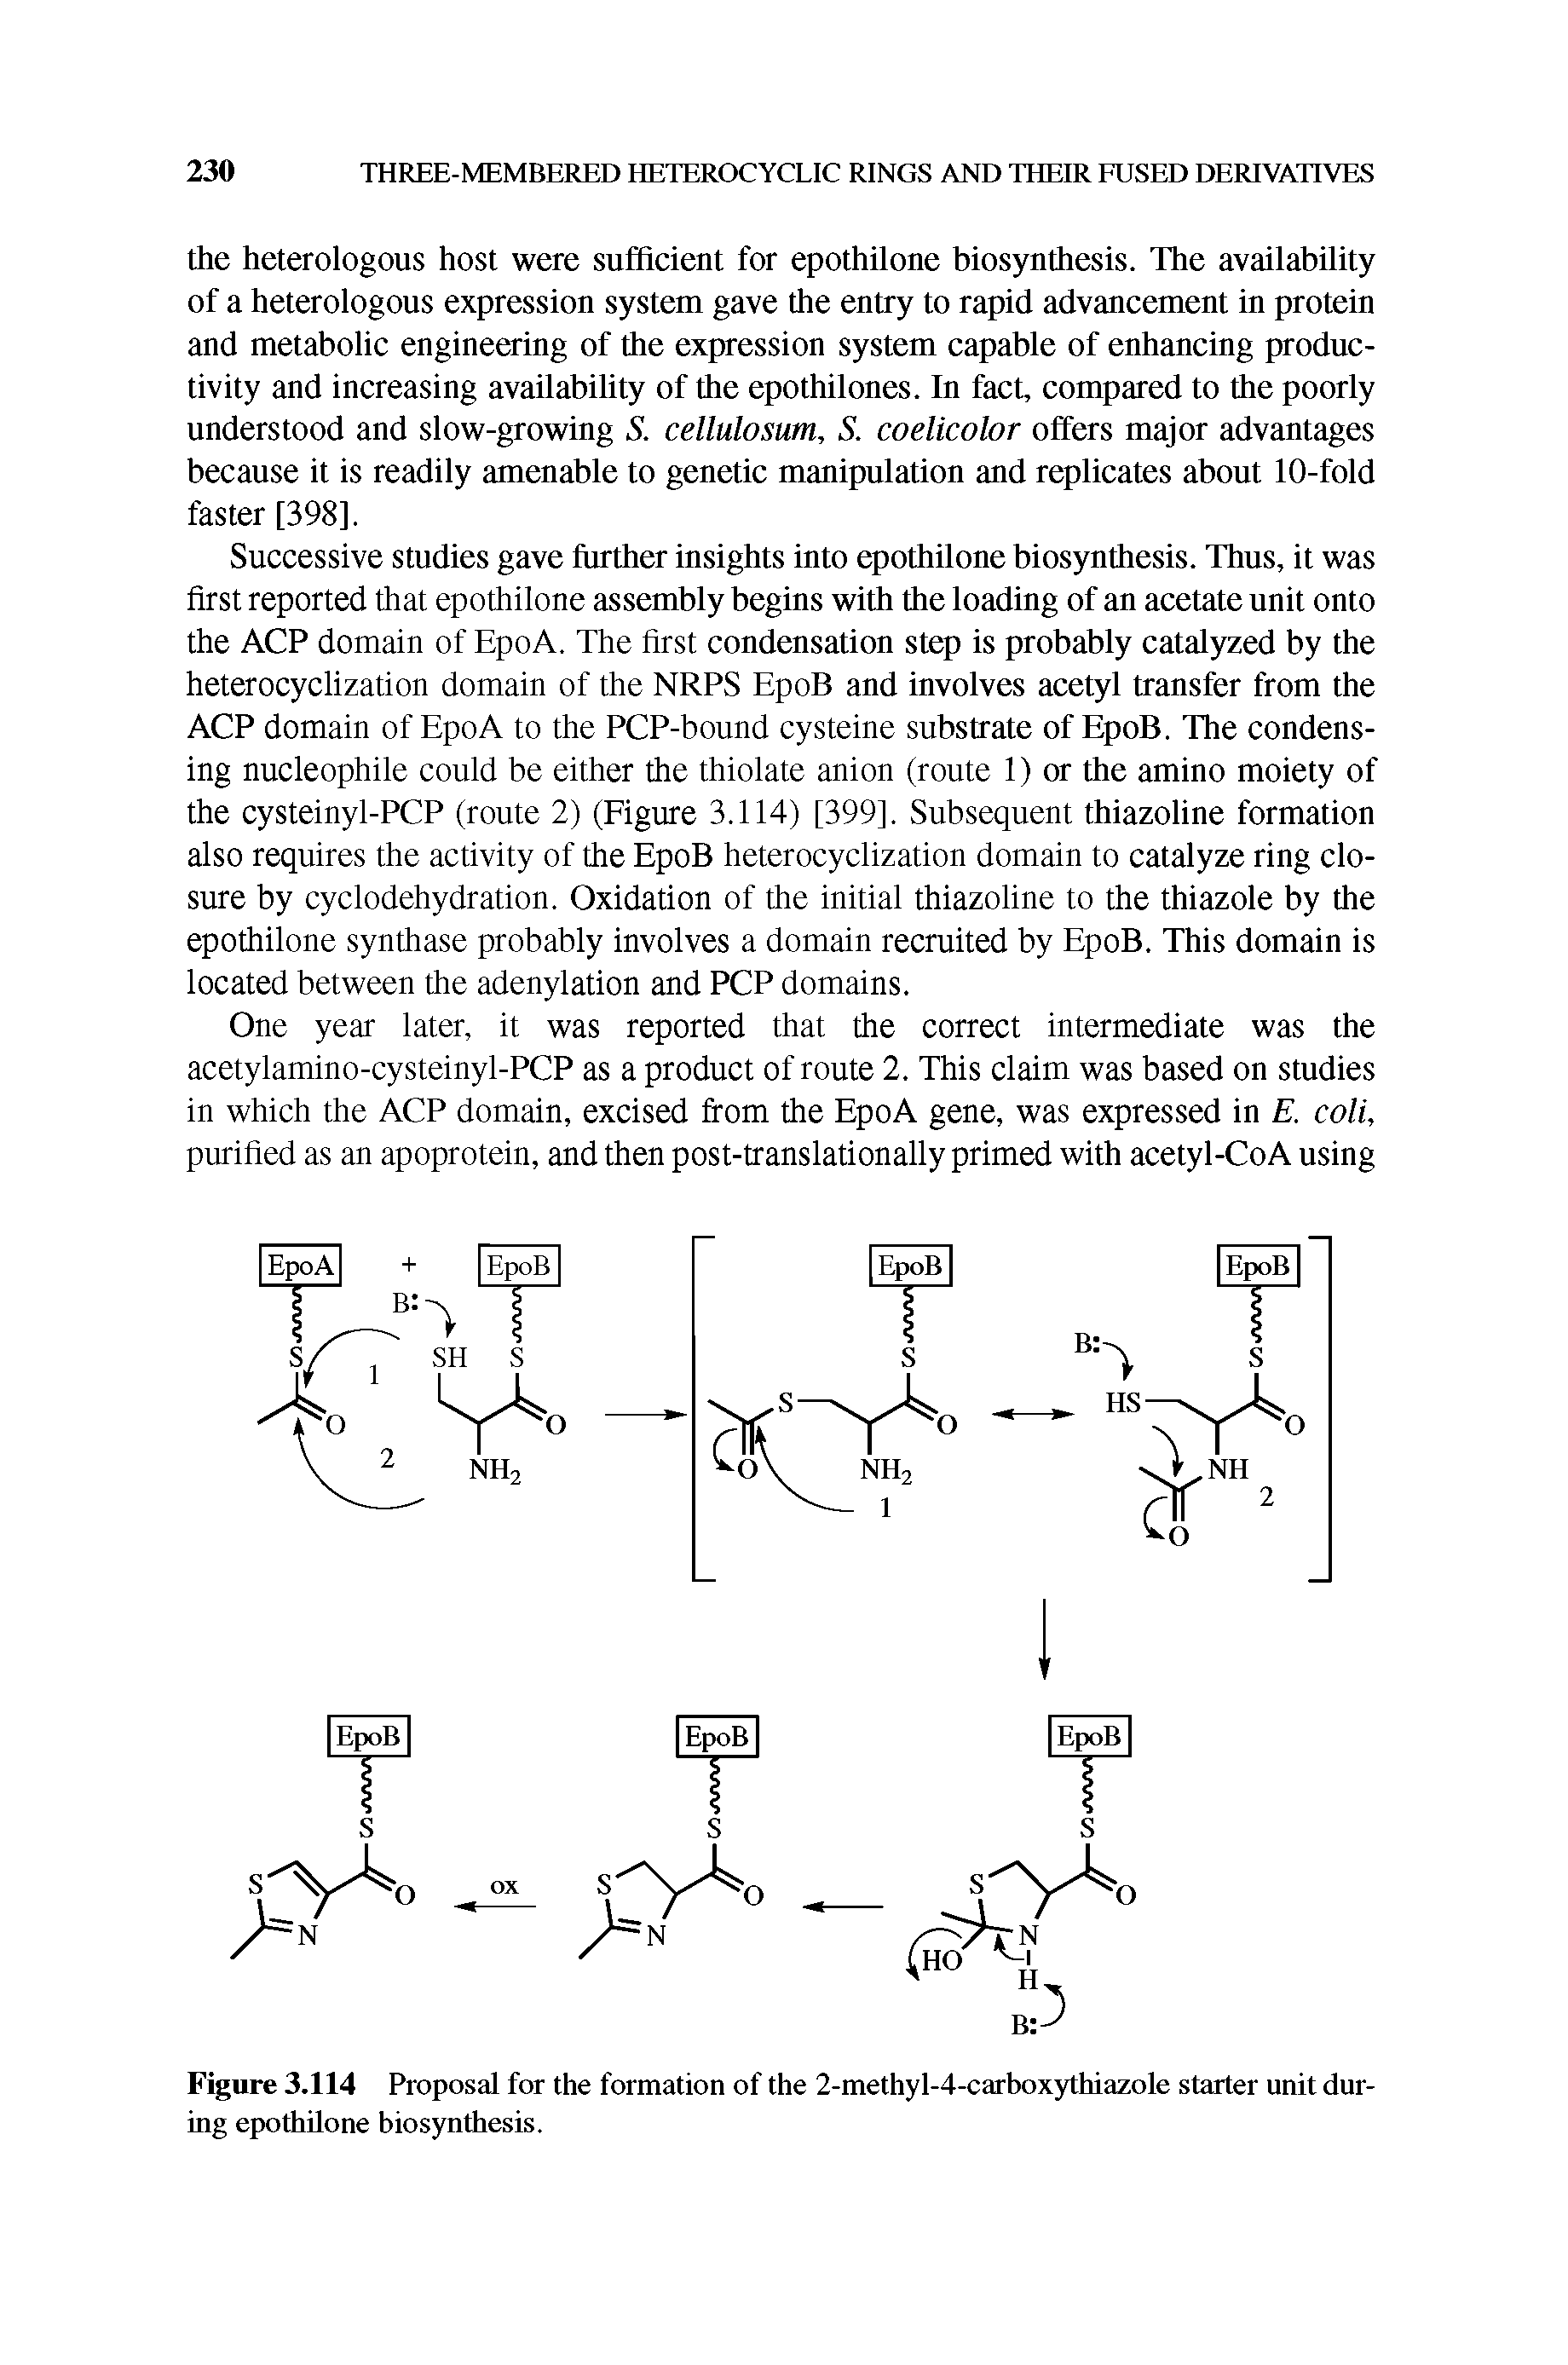 Figure 3.114 Proposal for the formation of the 2-methyl-4-carboxythiazole starter unit during epothilone biosynthesis.